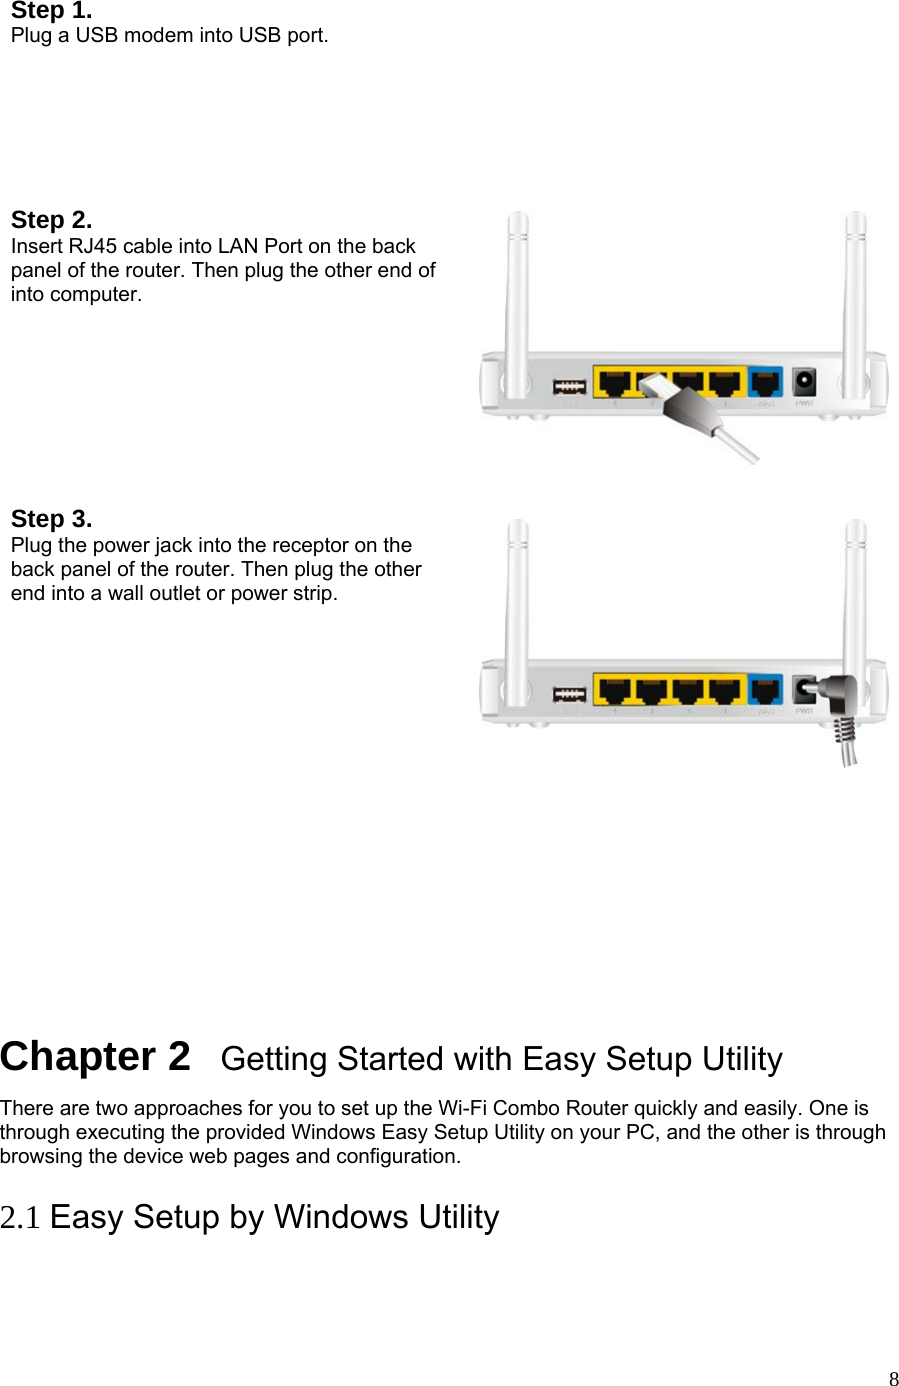  8 Step 1.   Plug a USB modem into USB port.   Step 2. Insert RJ45 cable into LAN Port on the back panel of the router. Then plug the other end of into computer.   Step 3. Plug the power jack into the receptor on the back panel of the router. Then plug the other end into a wall outlet or power strip.               Chapter 2   Getting Started with Easy Setup Utility There are two approaches for you to set up the Wi-Fi Combo Router quickly and easily. One is through executing the provided Windows Easy Setup Utility on your PC, and the other is through browsing the device web pages and configuration.  2.1 Easy Setup by Windows Utility   